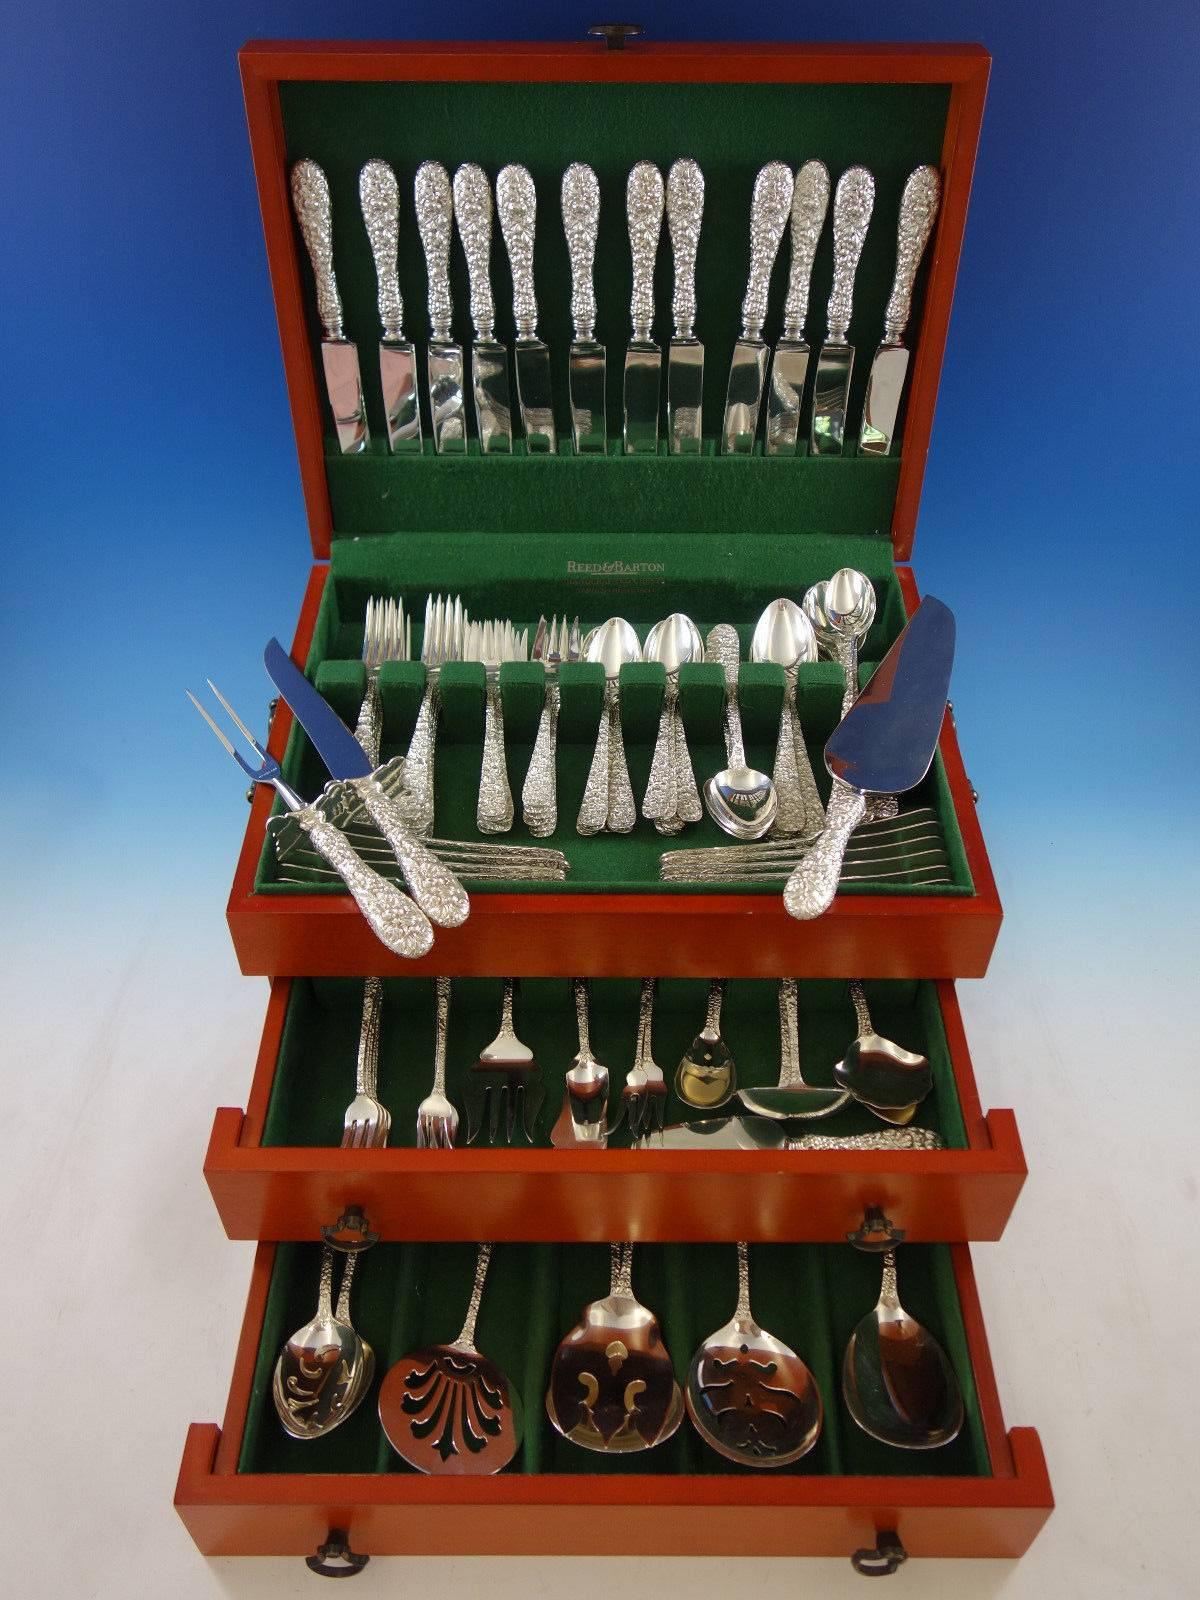 Rose by Stieff sterling silver repousse flatware set with many servers, 118 pieces. This set includes: 

12 knives, 8 7/8